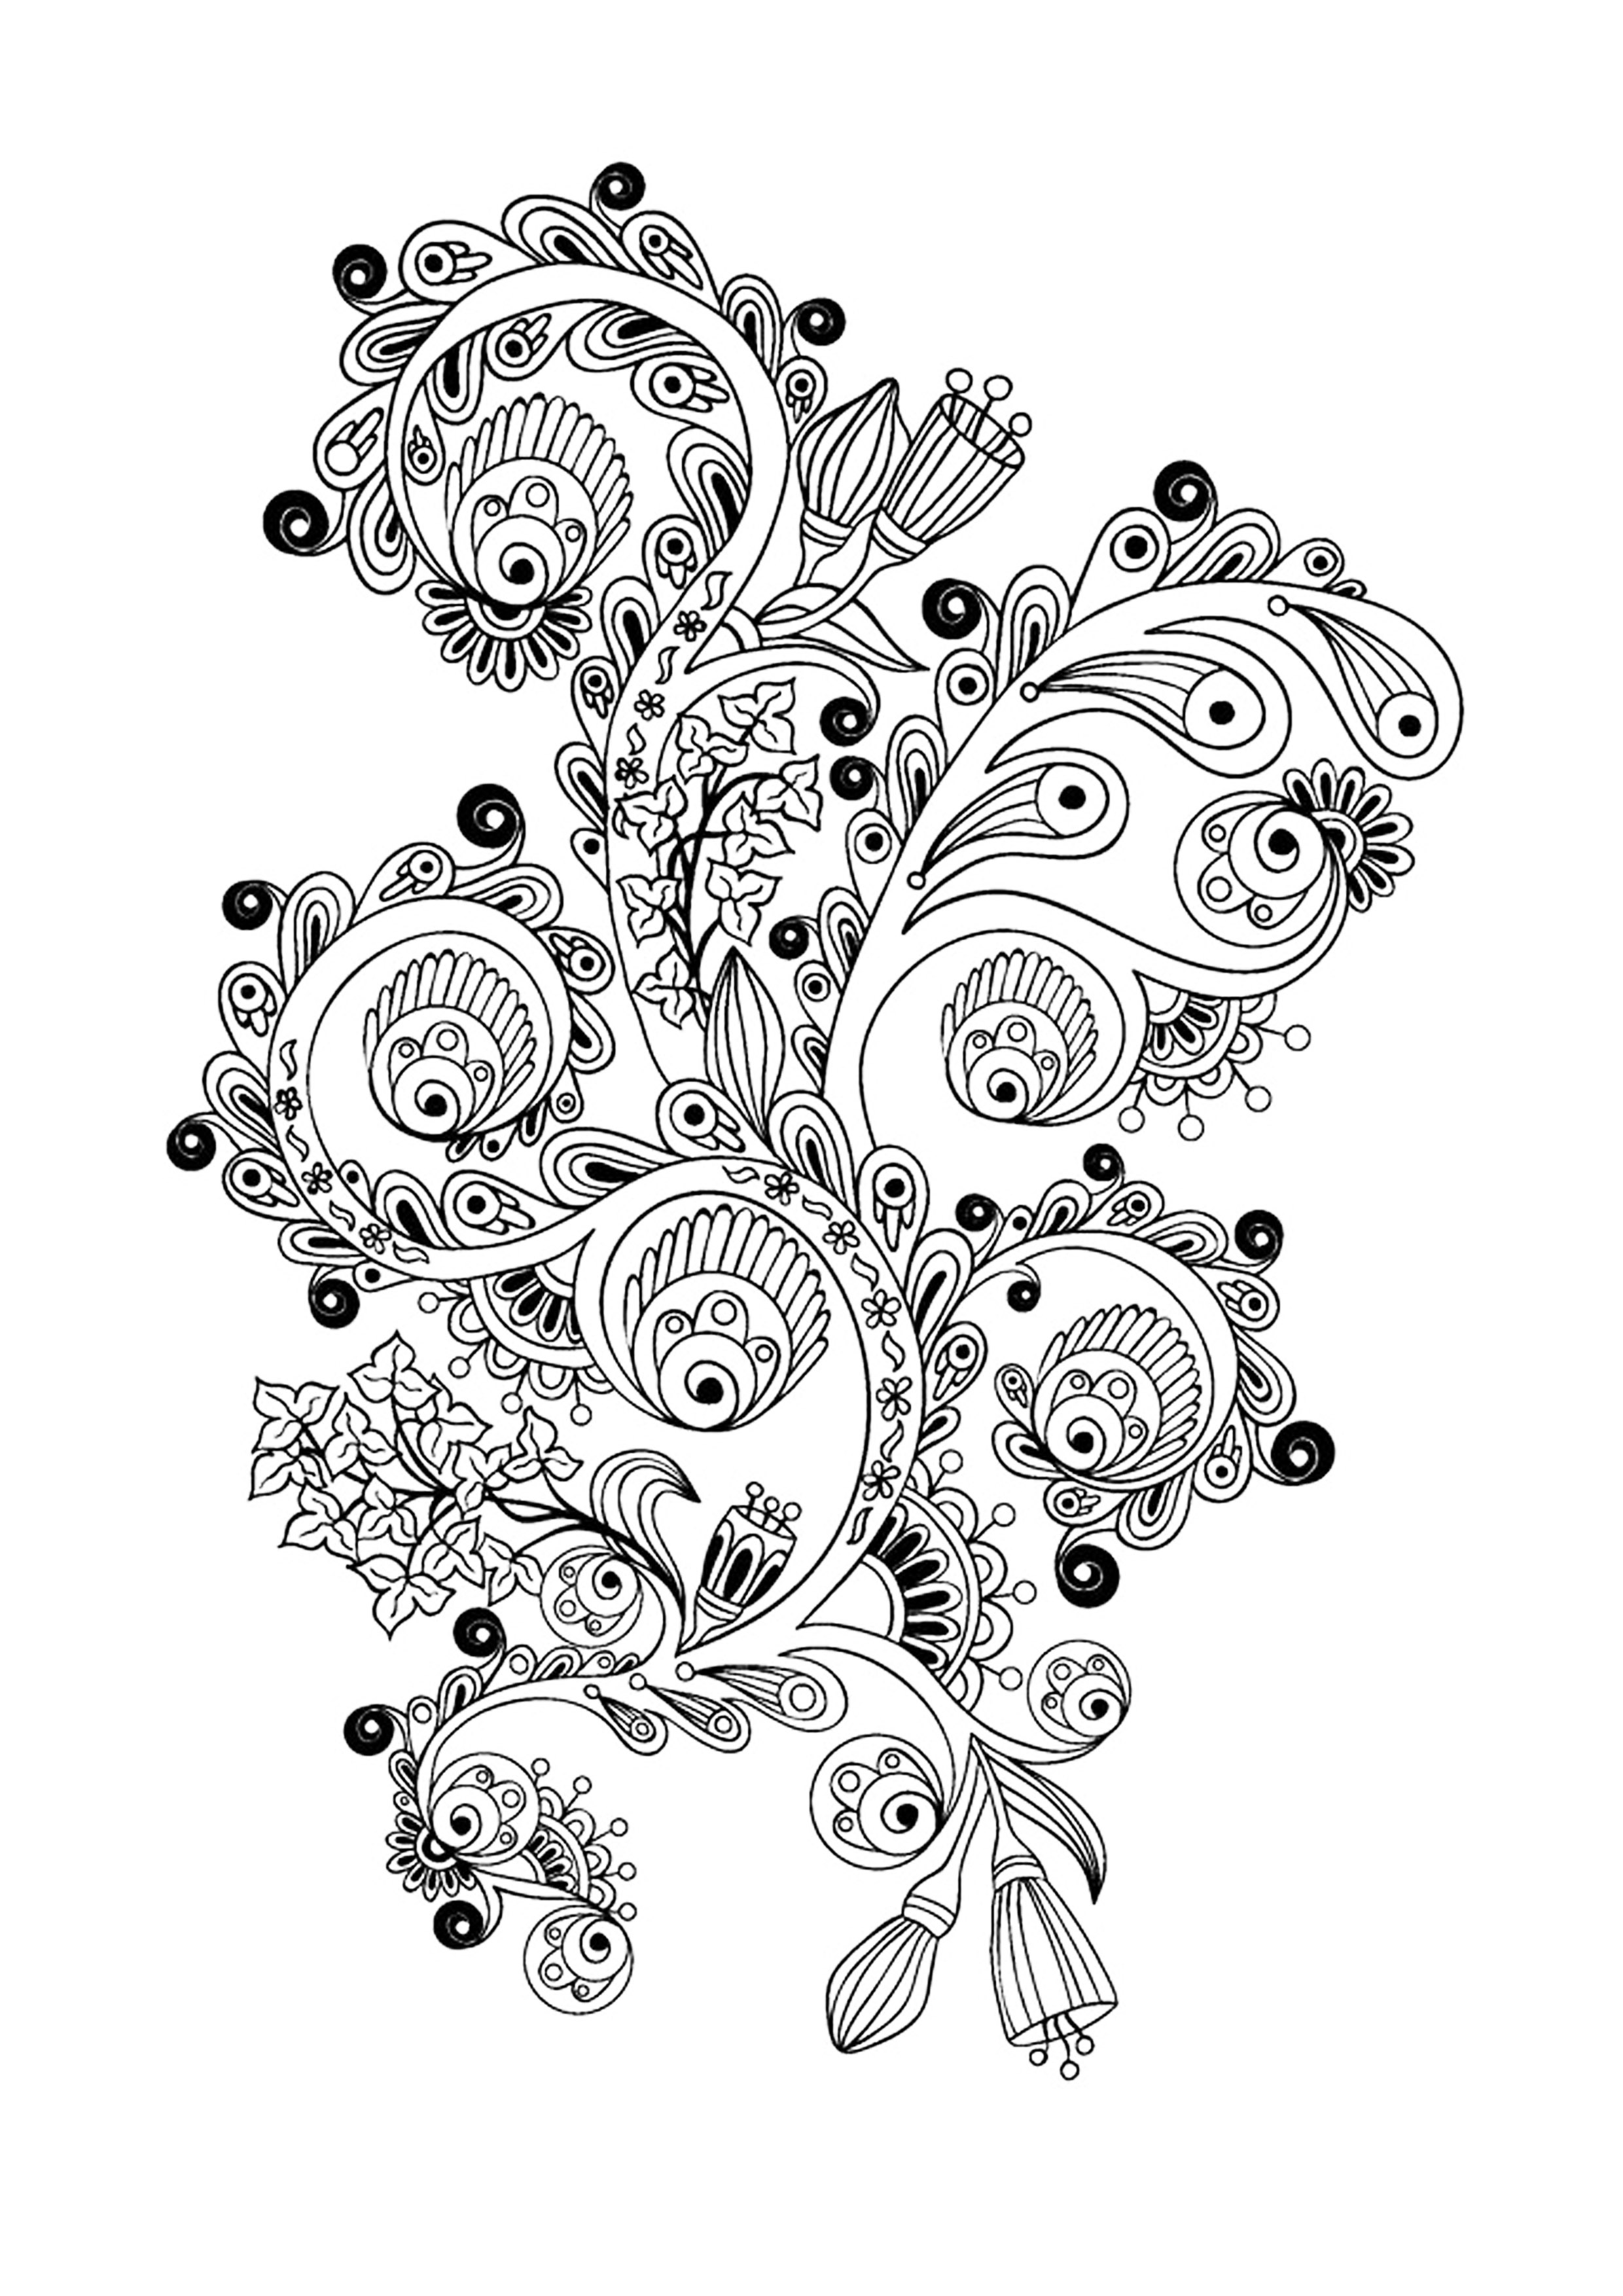 flower-coloring-pages-for-adults-best-coloring-pages-for-kids